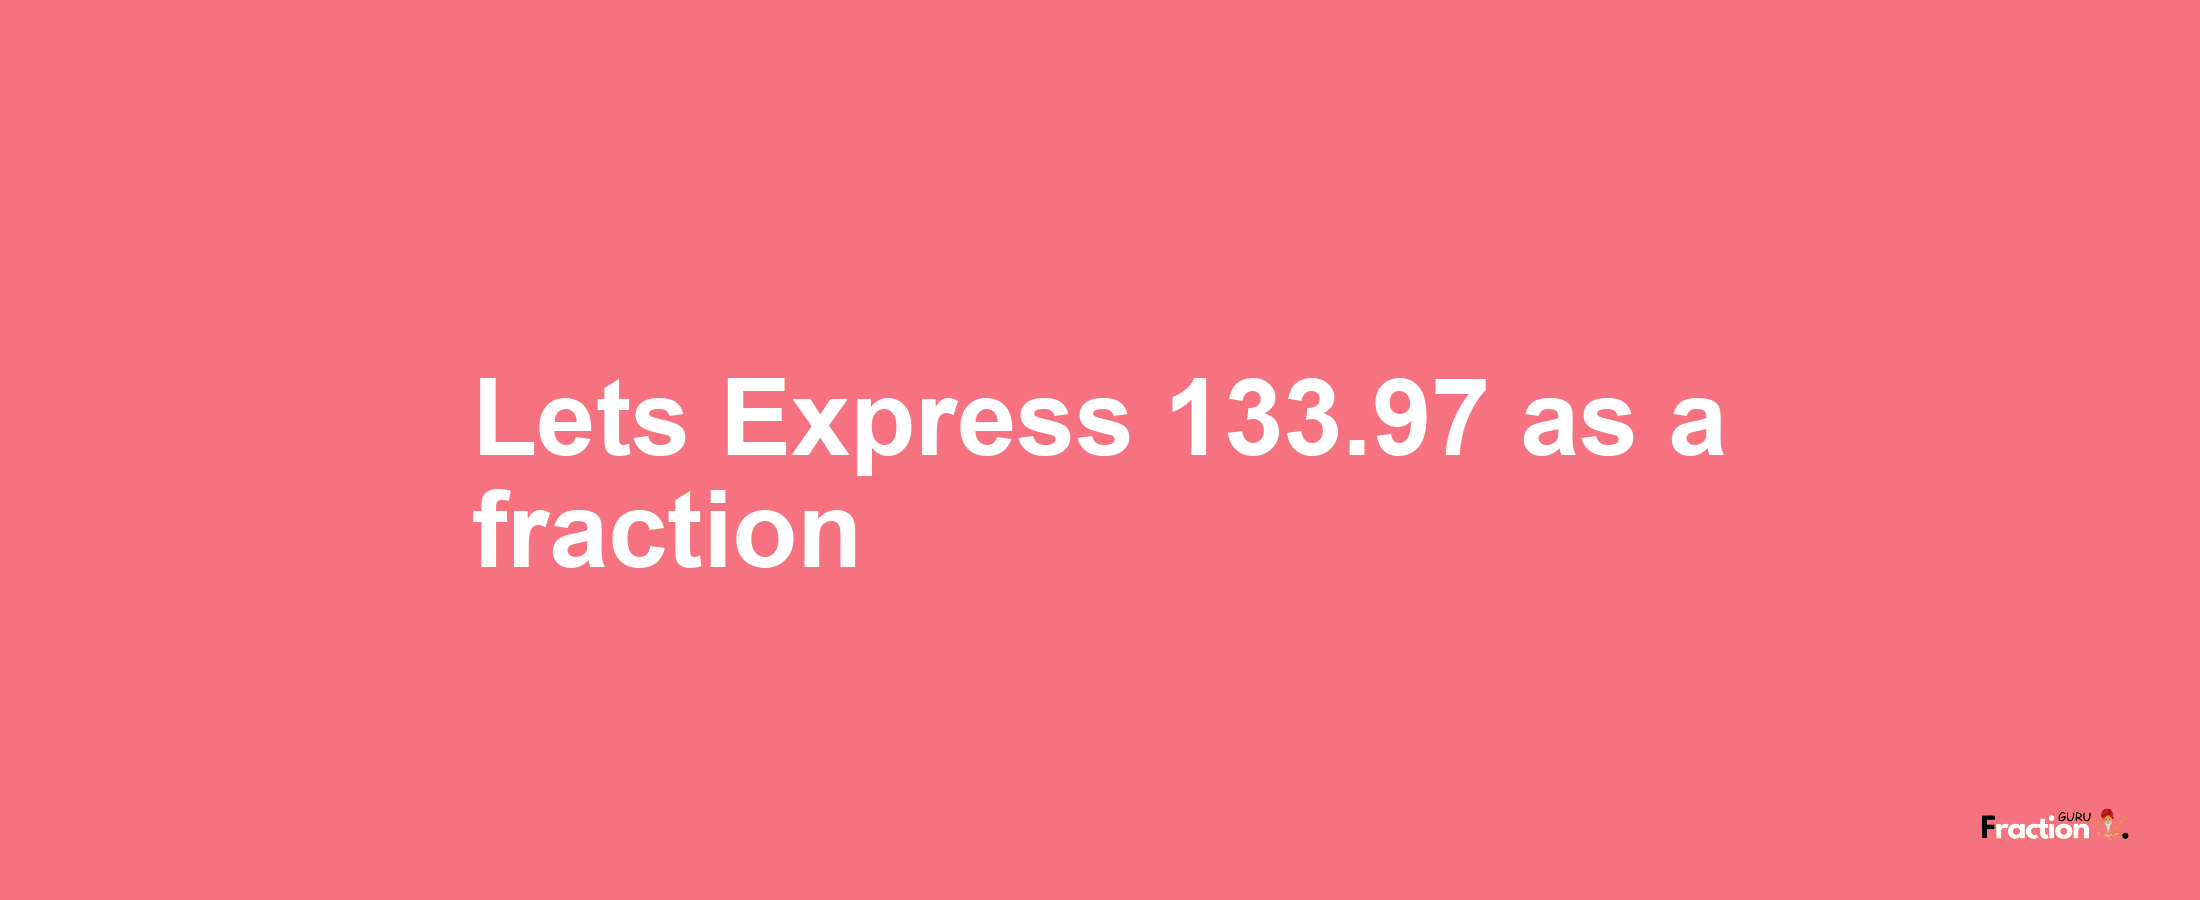 Lets Express 133.97 as afraction